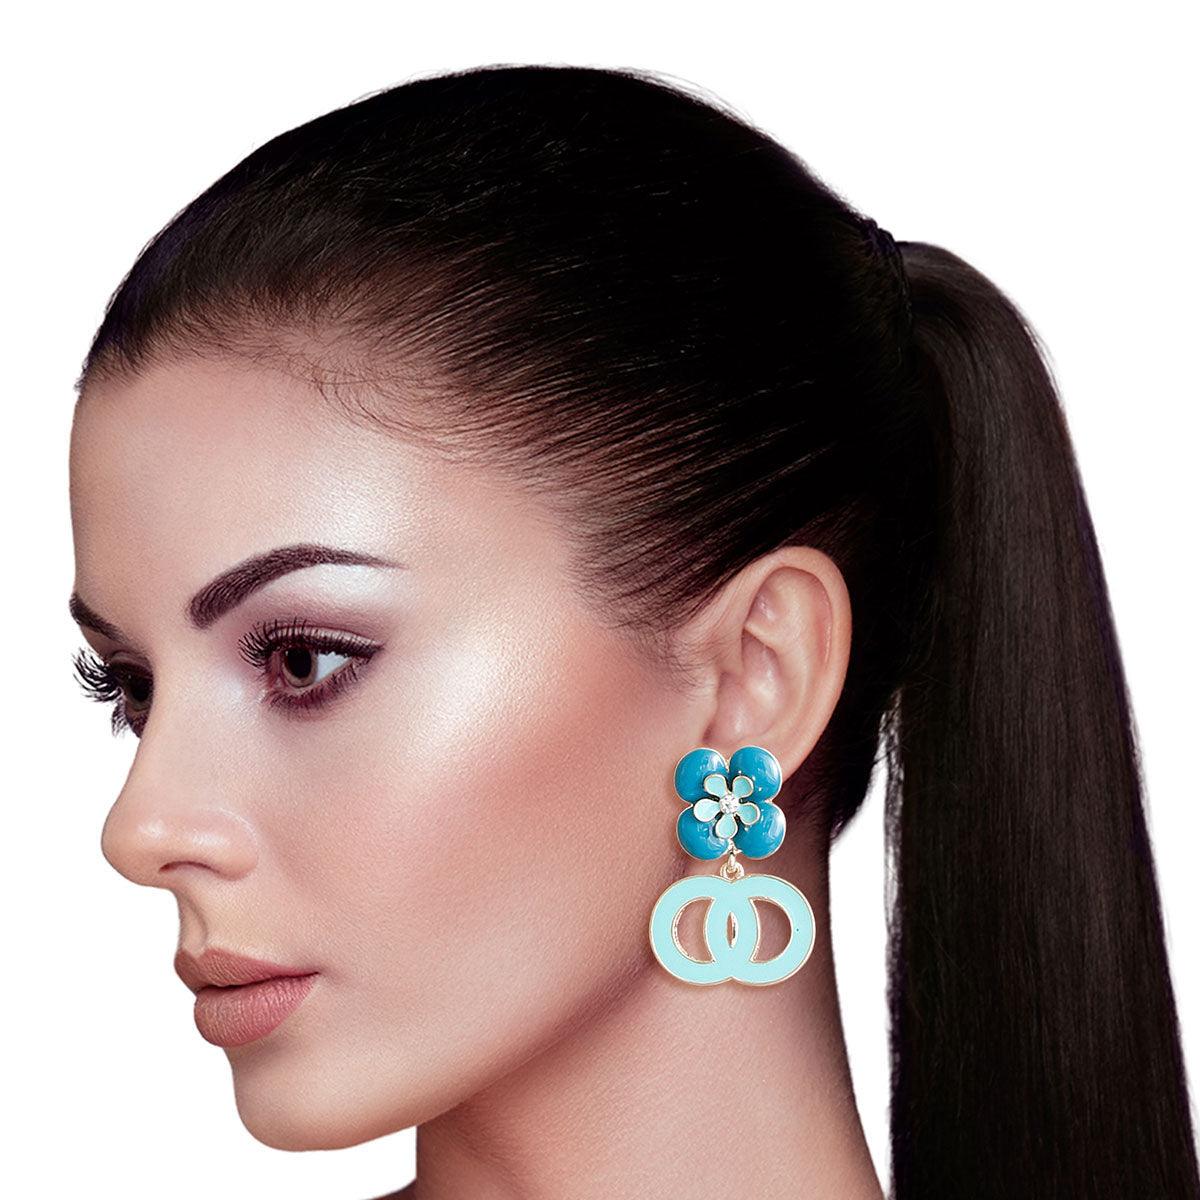 Teal Infinity Earrings with Flower Studs Sweet Statement